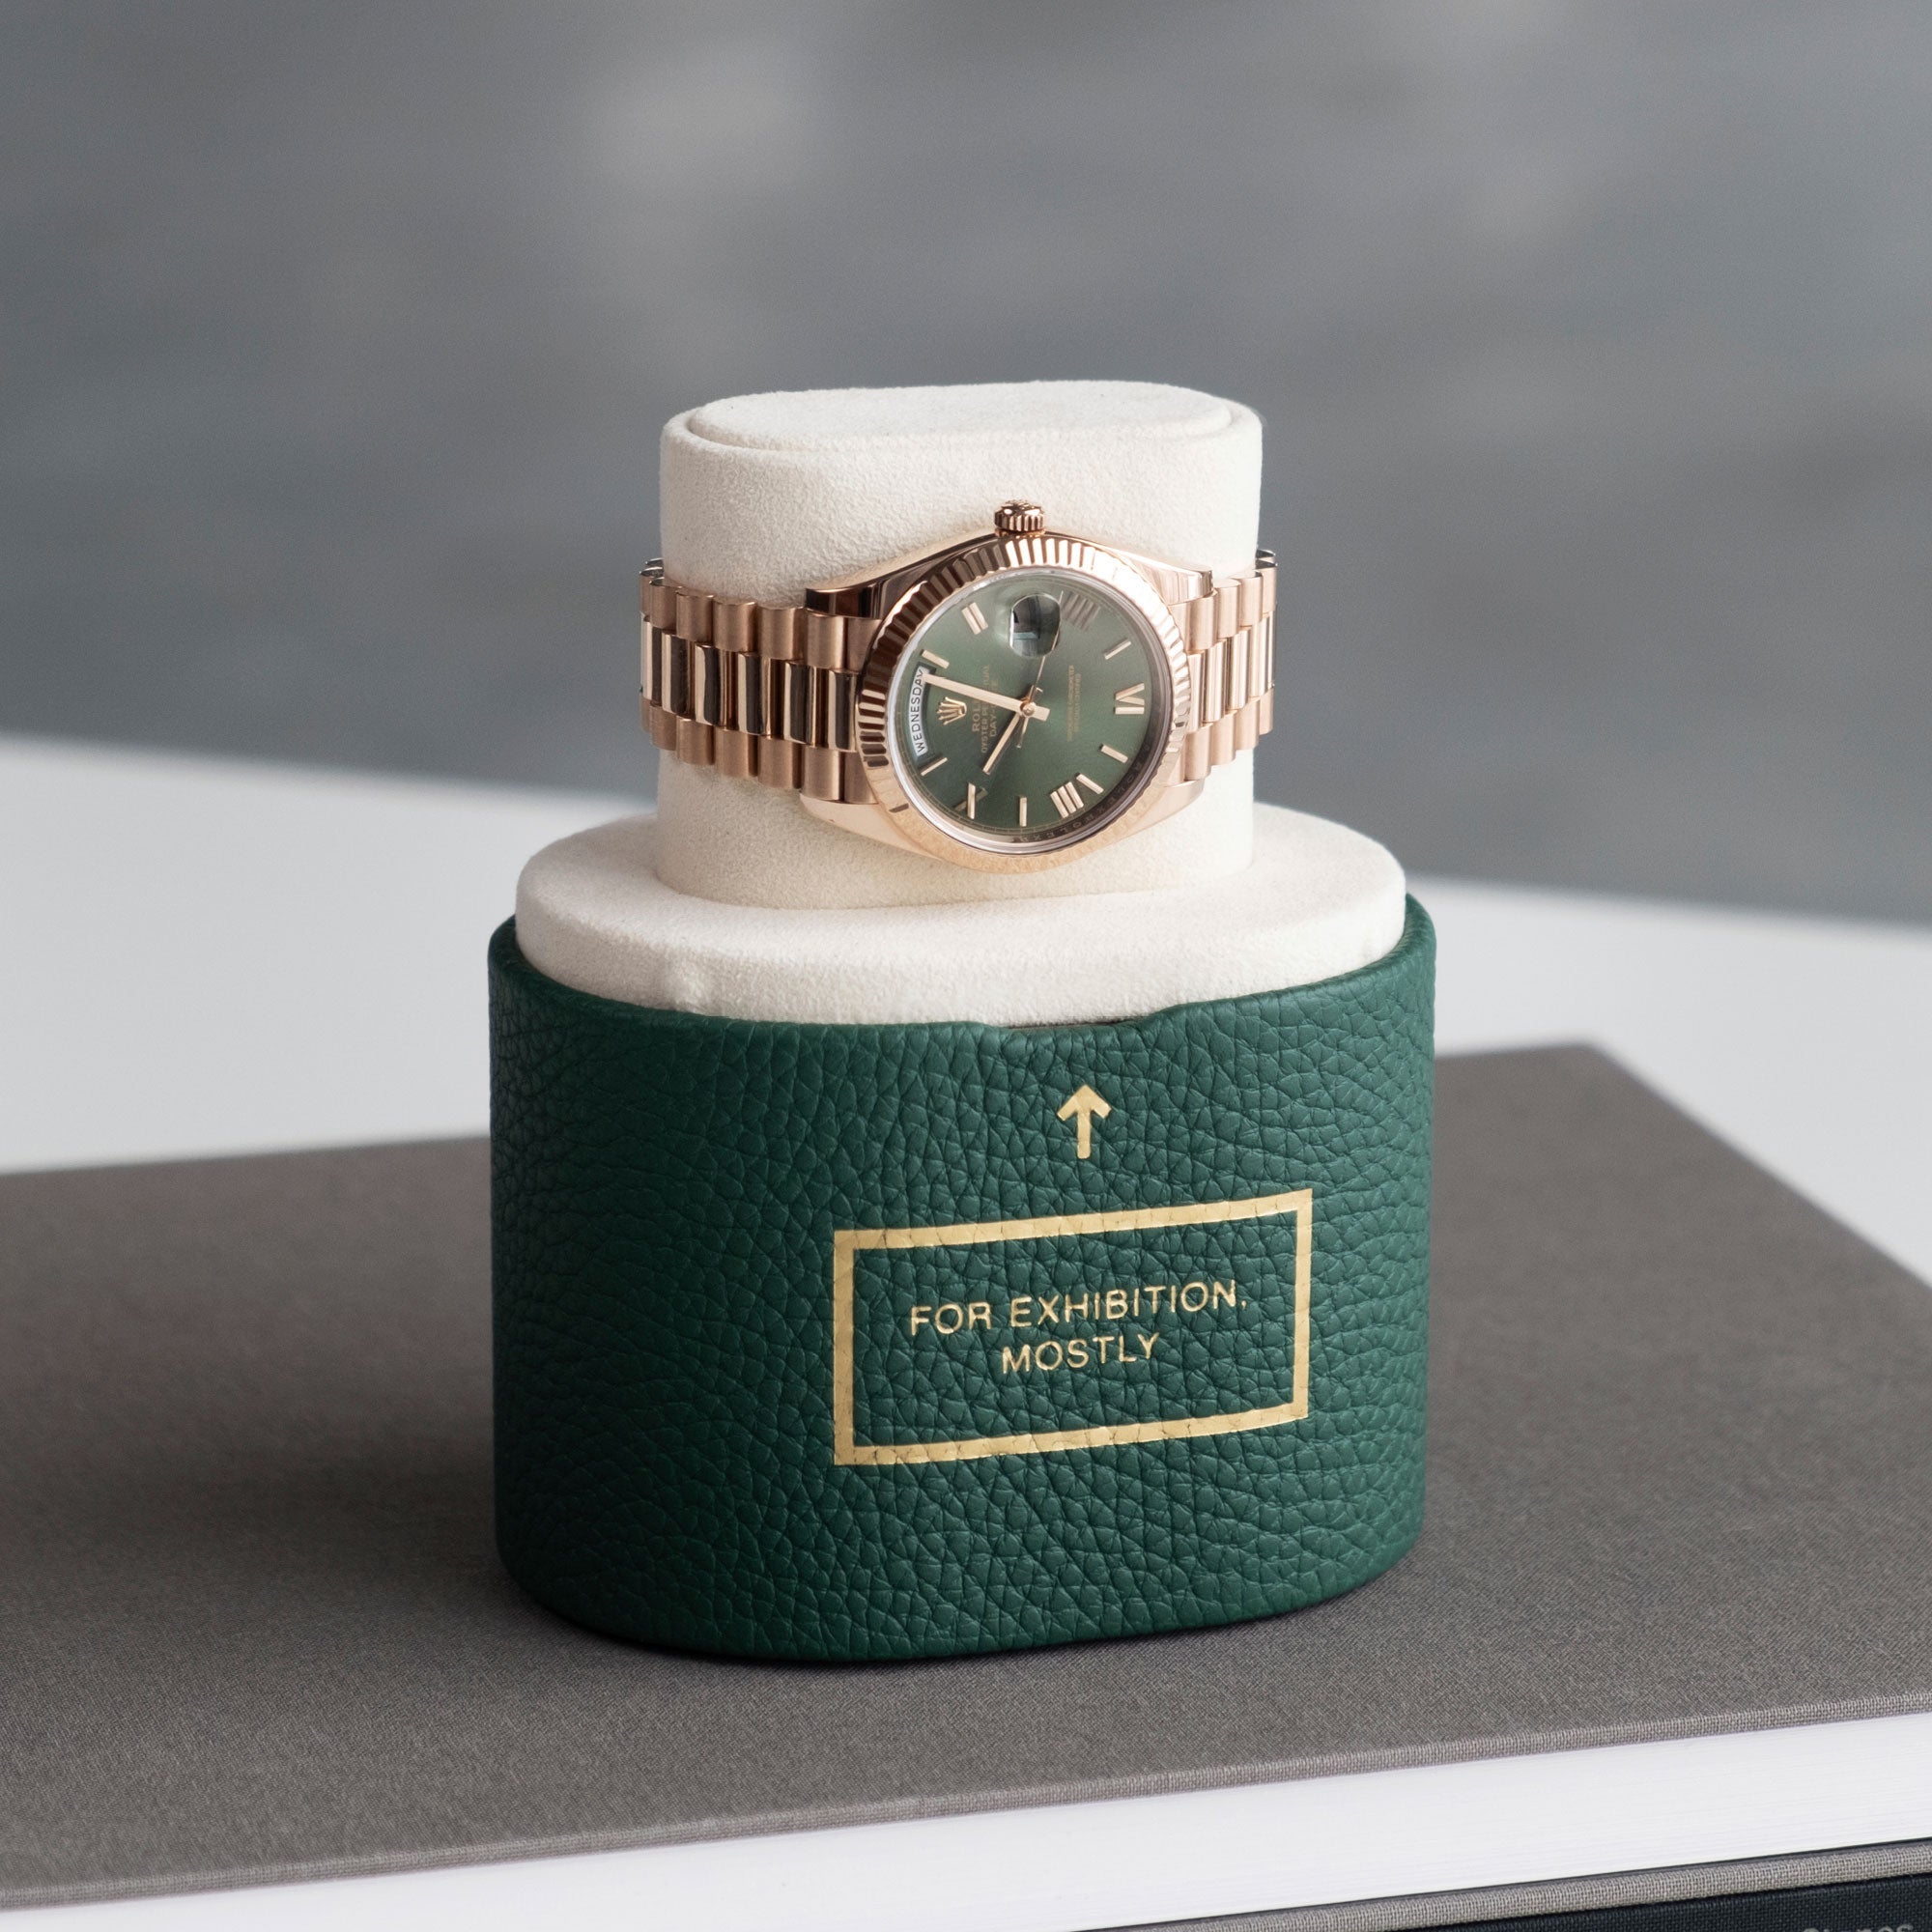 Lifestyle photo of Rolex Oyster Perpetual Day Date in gold bracelet with green dial displayed on Charles Simon x seconde/ seconde/ limited edition watch roll saying "For exibition only"